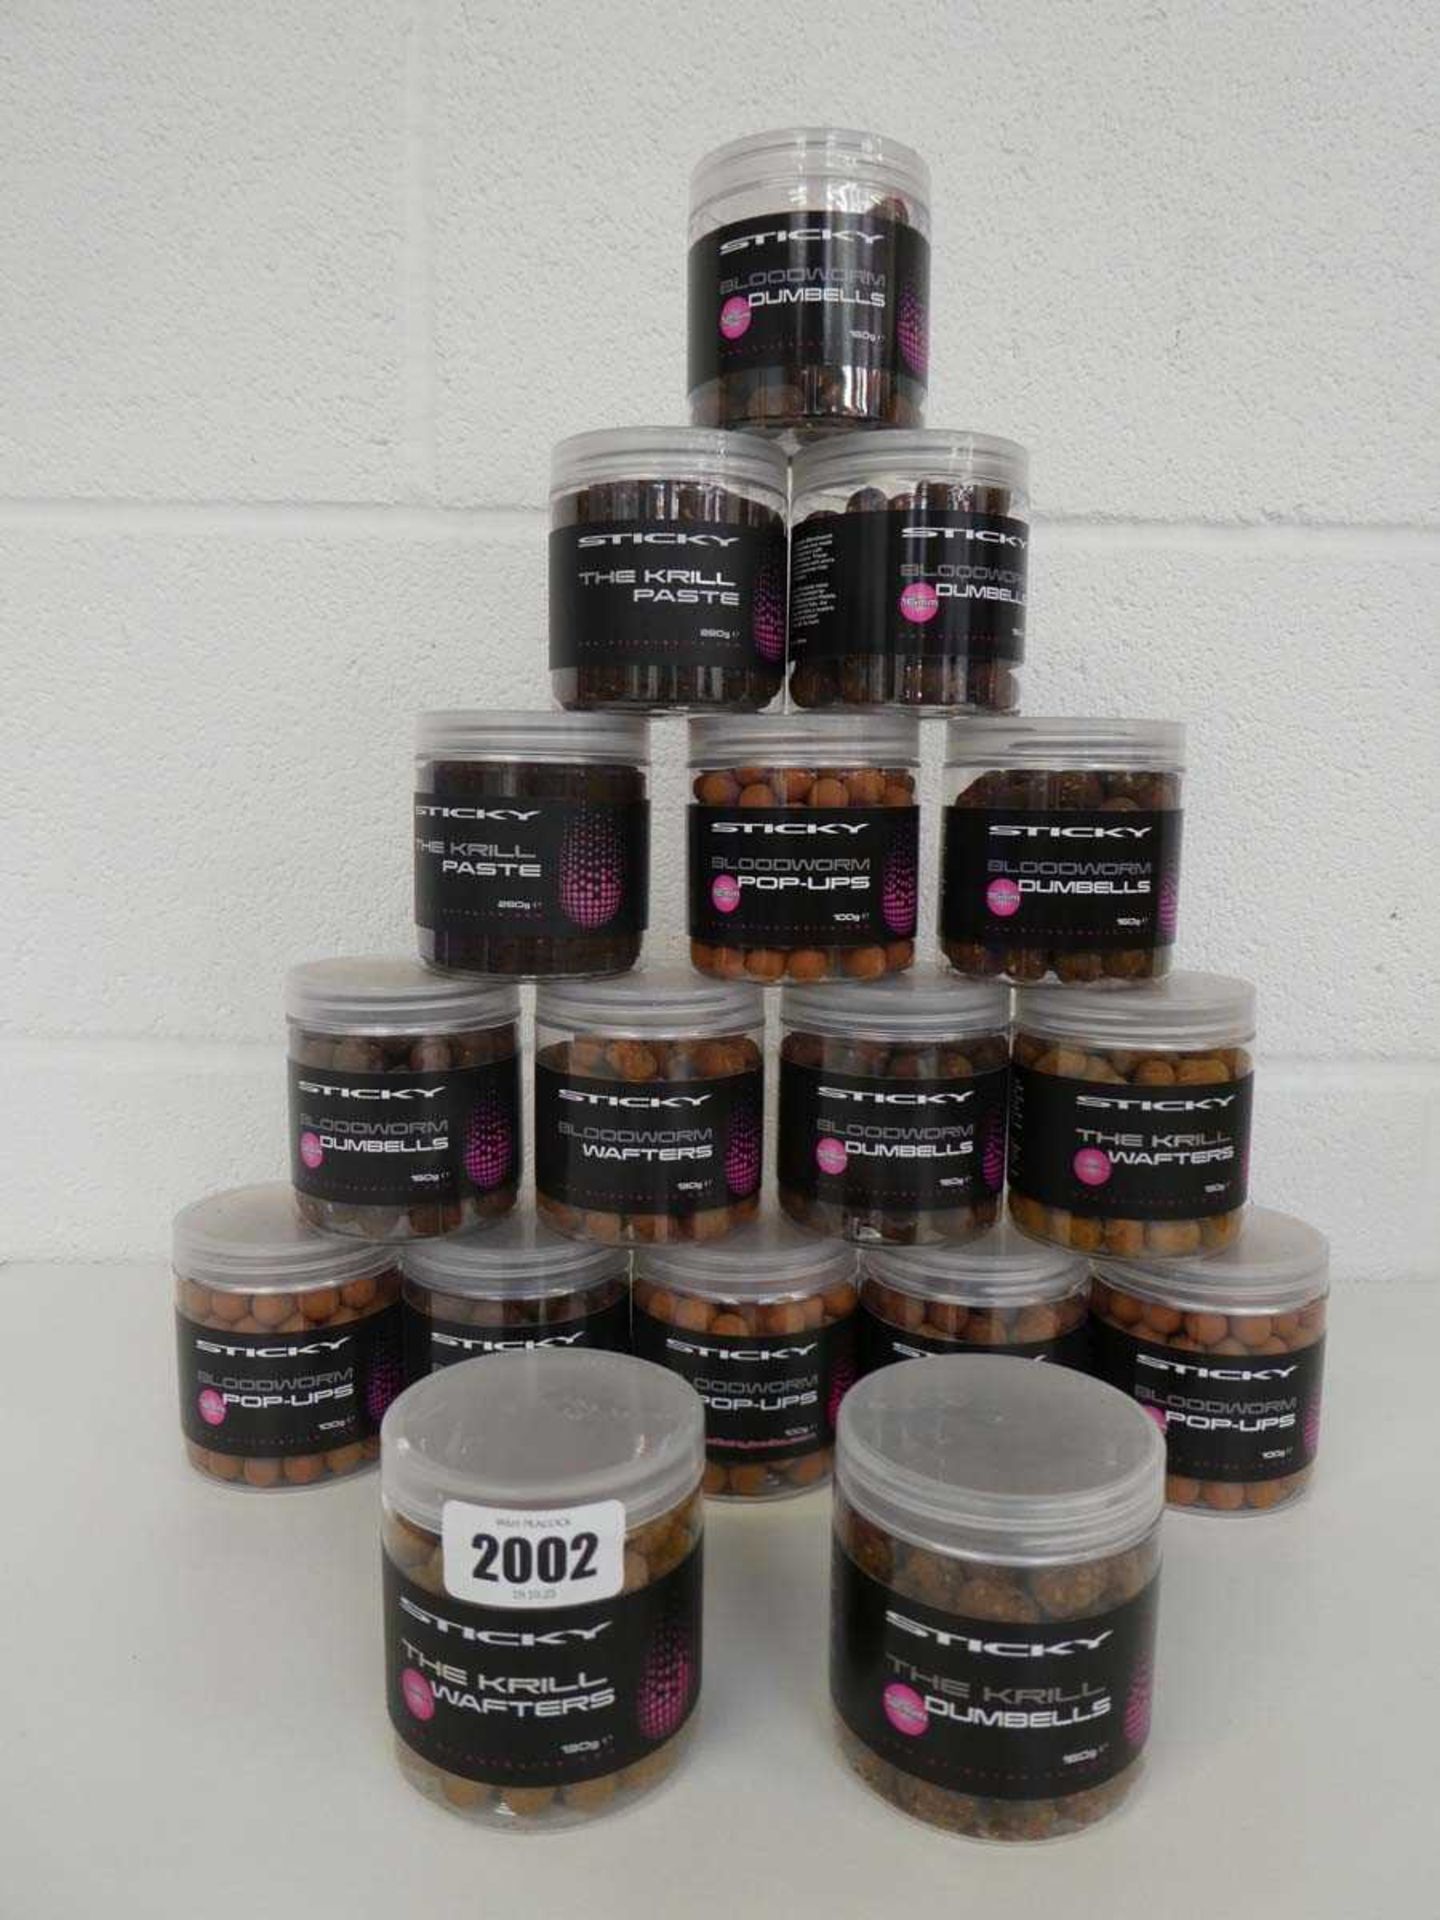 17 tubs of Sticky fishing bait incl. wafters, dumbbells, pop-ups, paste, etc incl. krill,